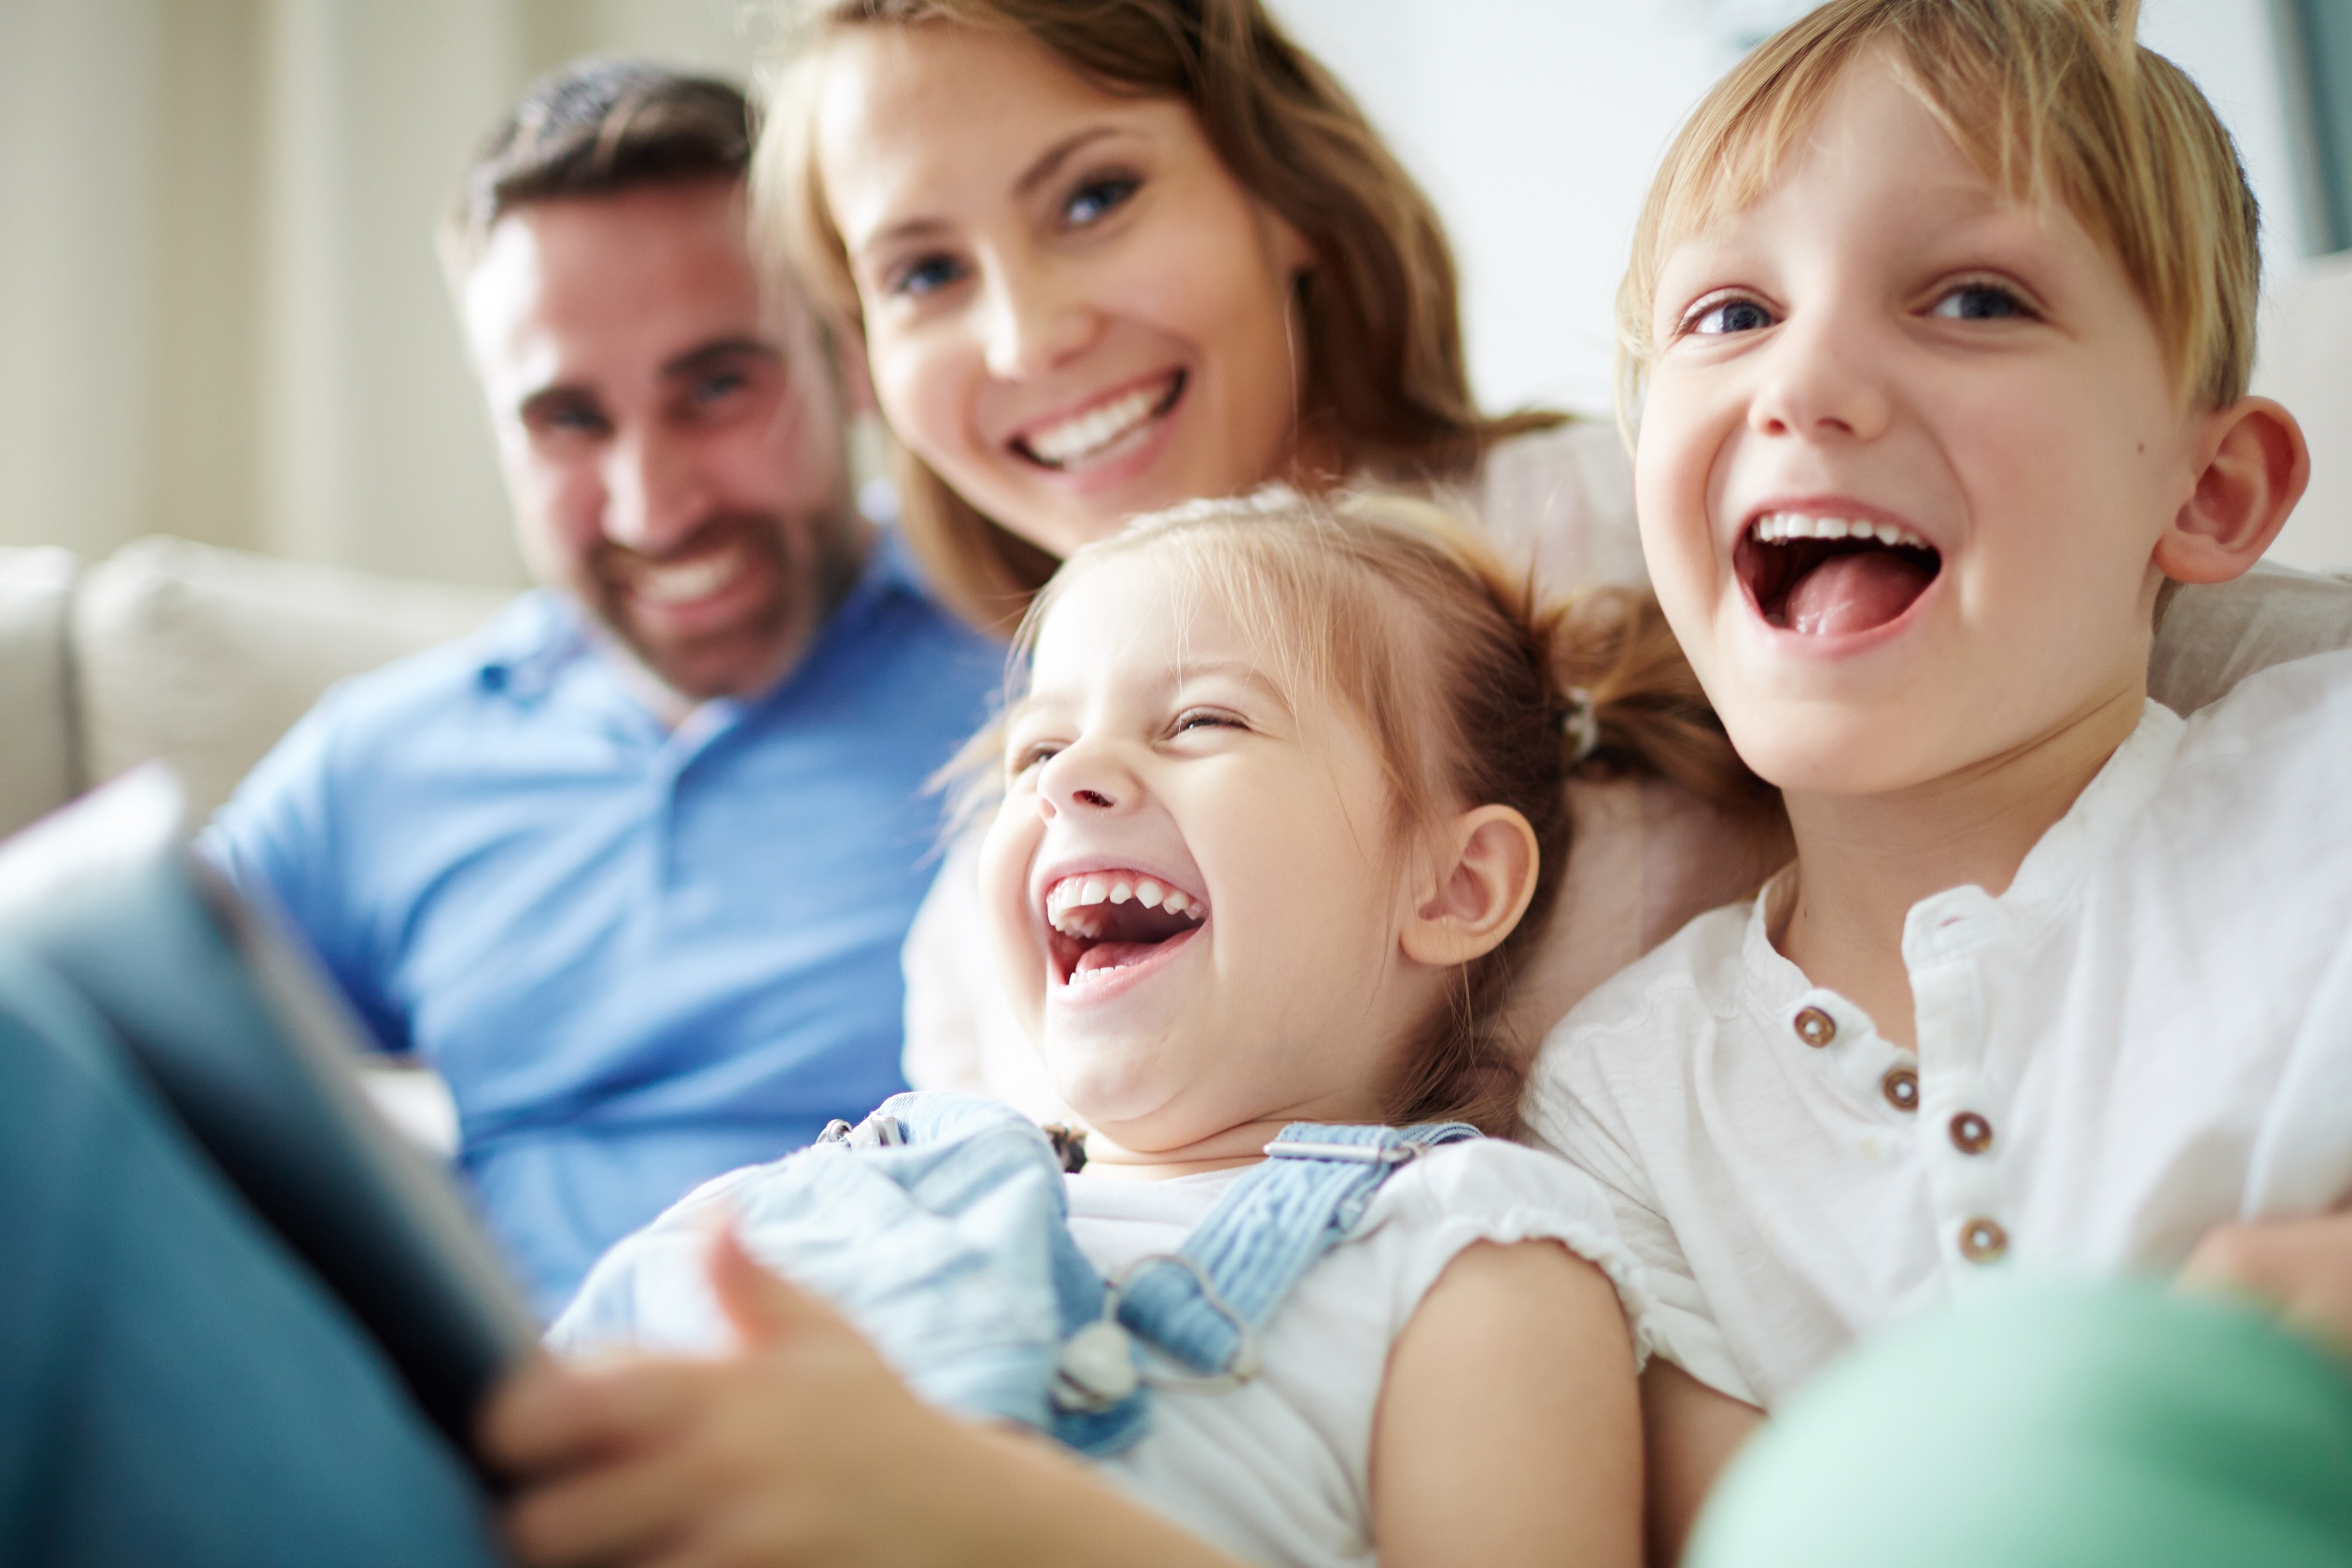 We are the best dentistry in North Ryde that caters to your family's dental needs.